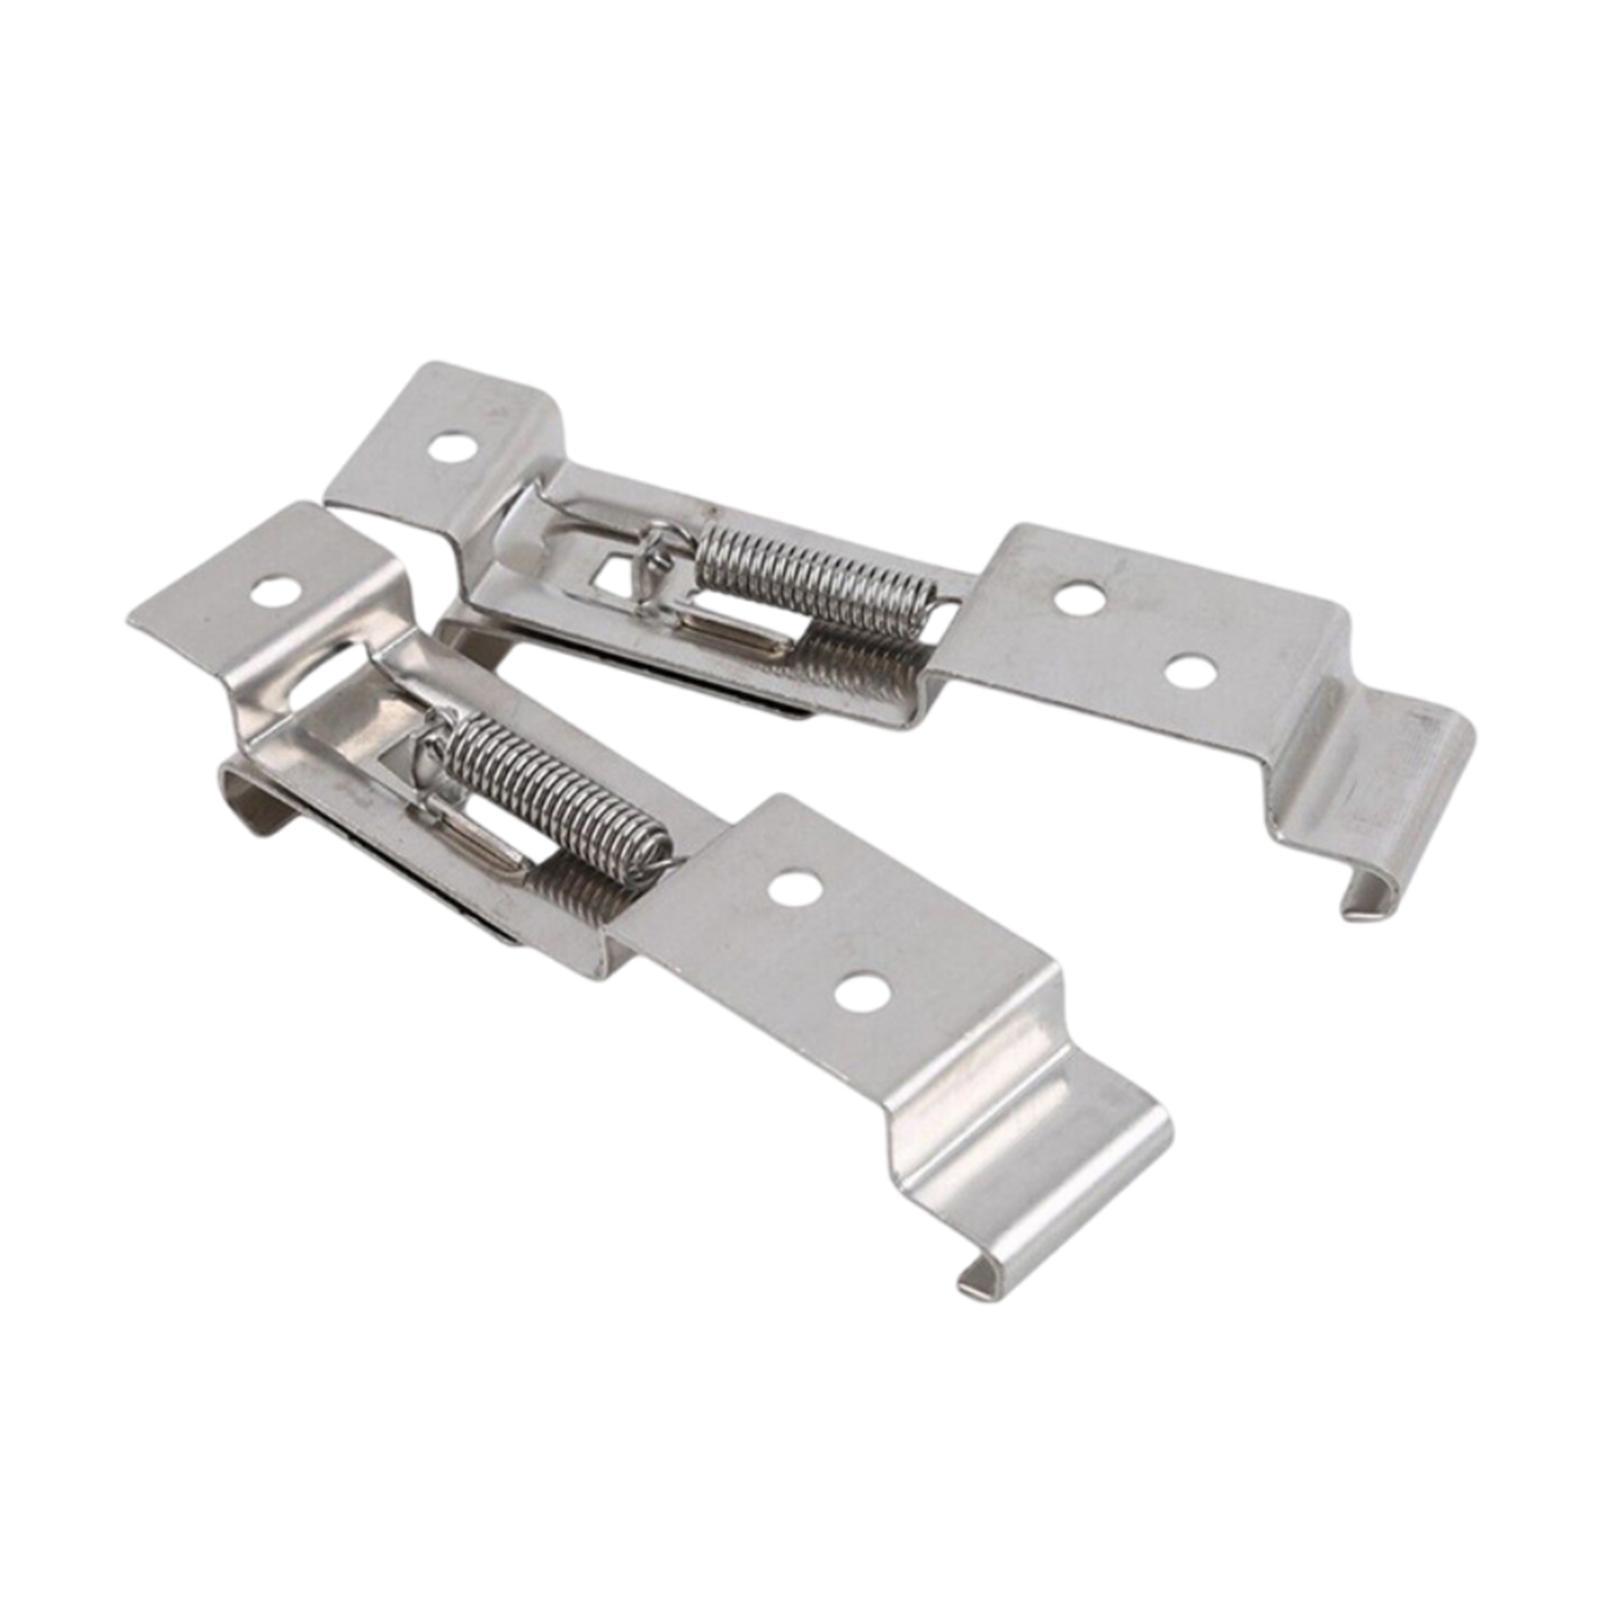 2x Cars  Plate Cover Trailer Number Plate Clips for Trailer Durable